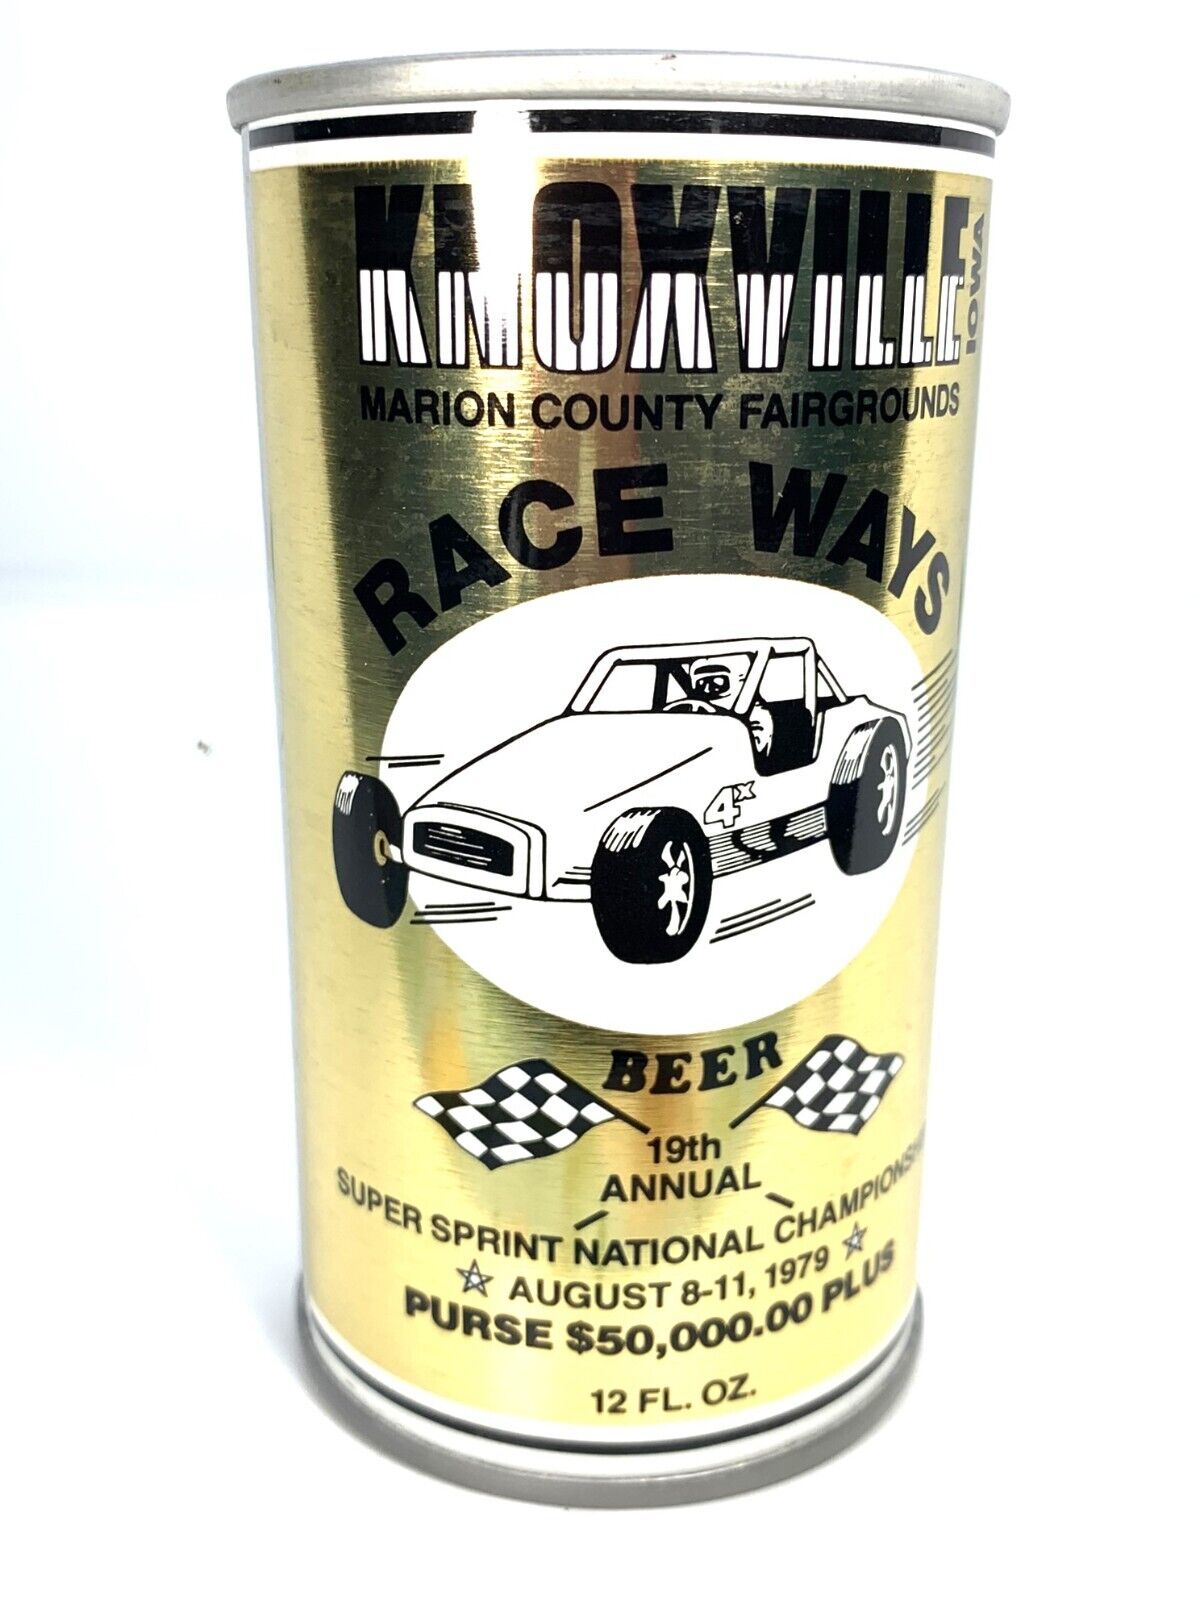 KNOXVILLE RACE WAYS Super Sprint Nat\'l Championship Steel BEER CAN Air-filled